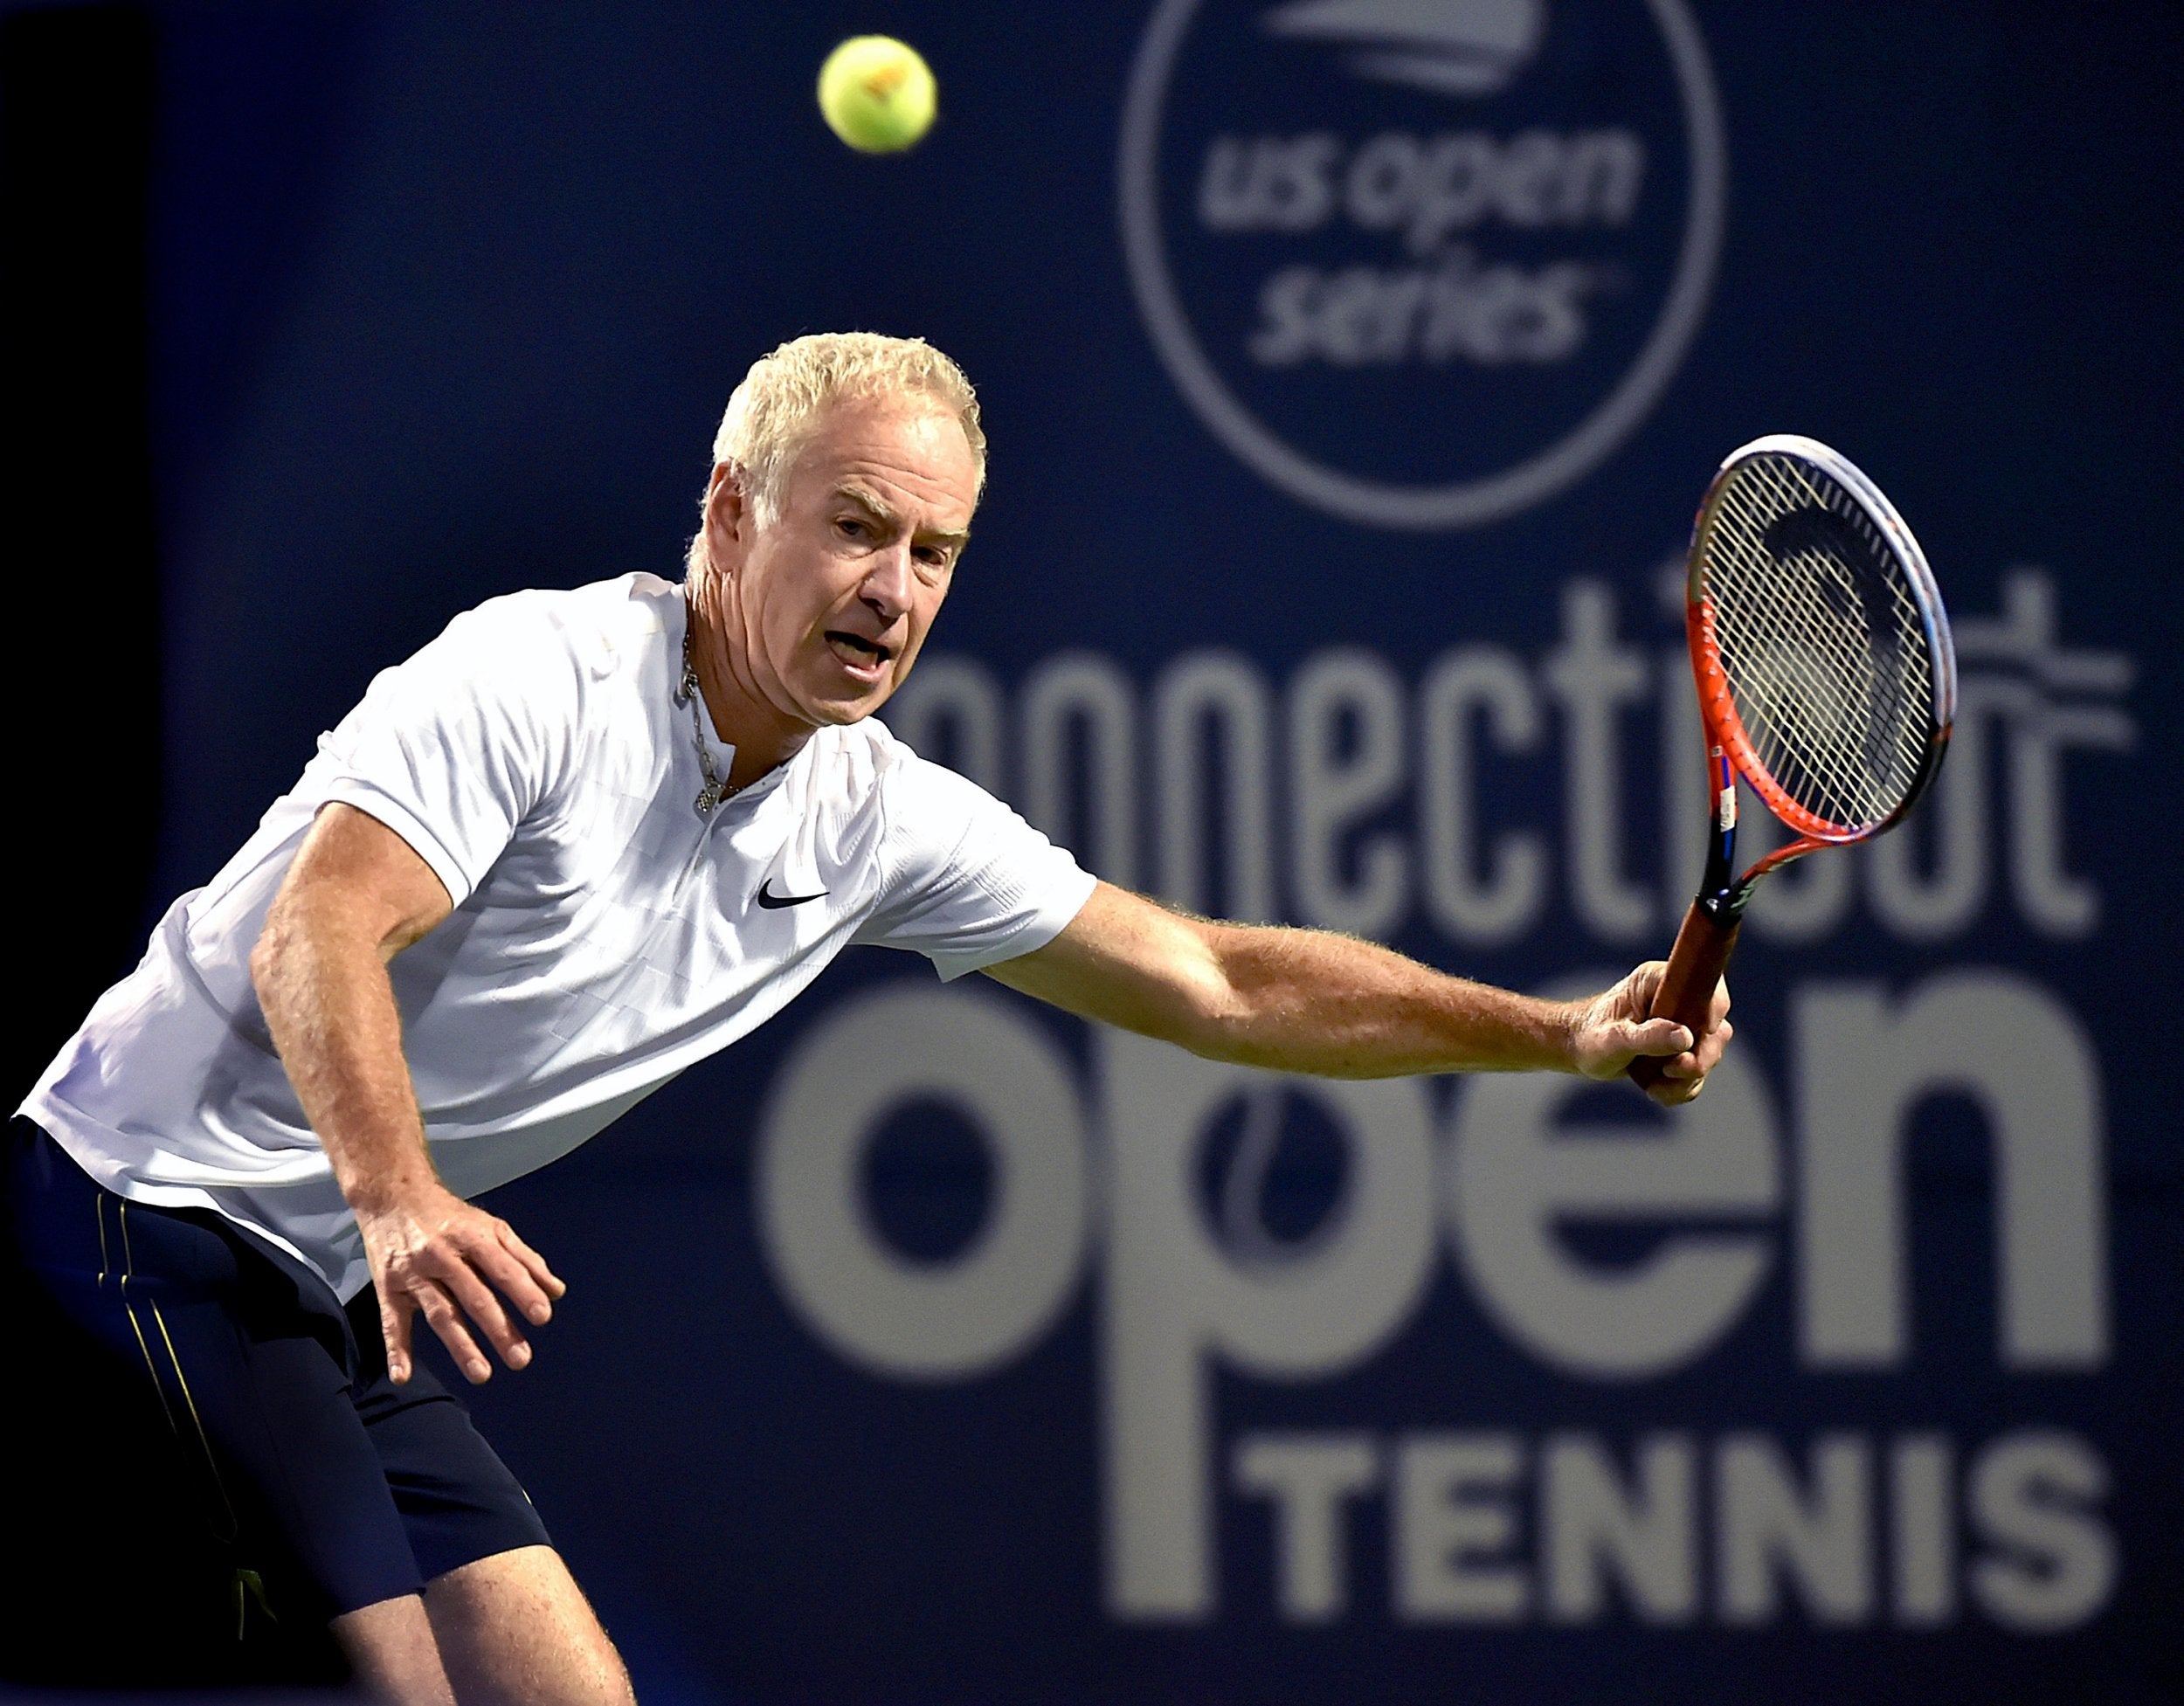 John McEnroe playing at the recent Legend's Connecticut Open